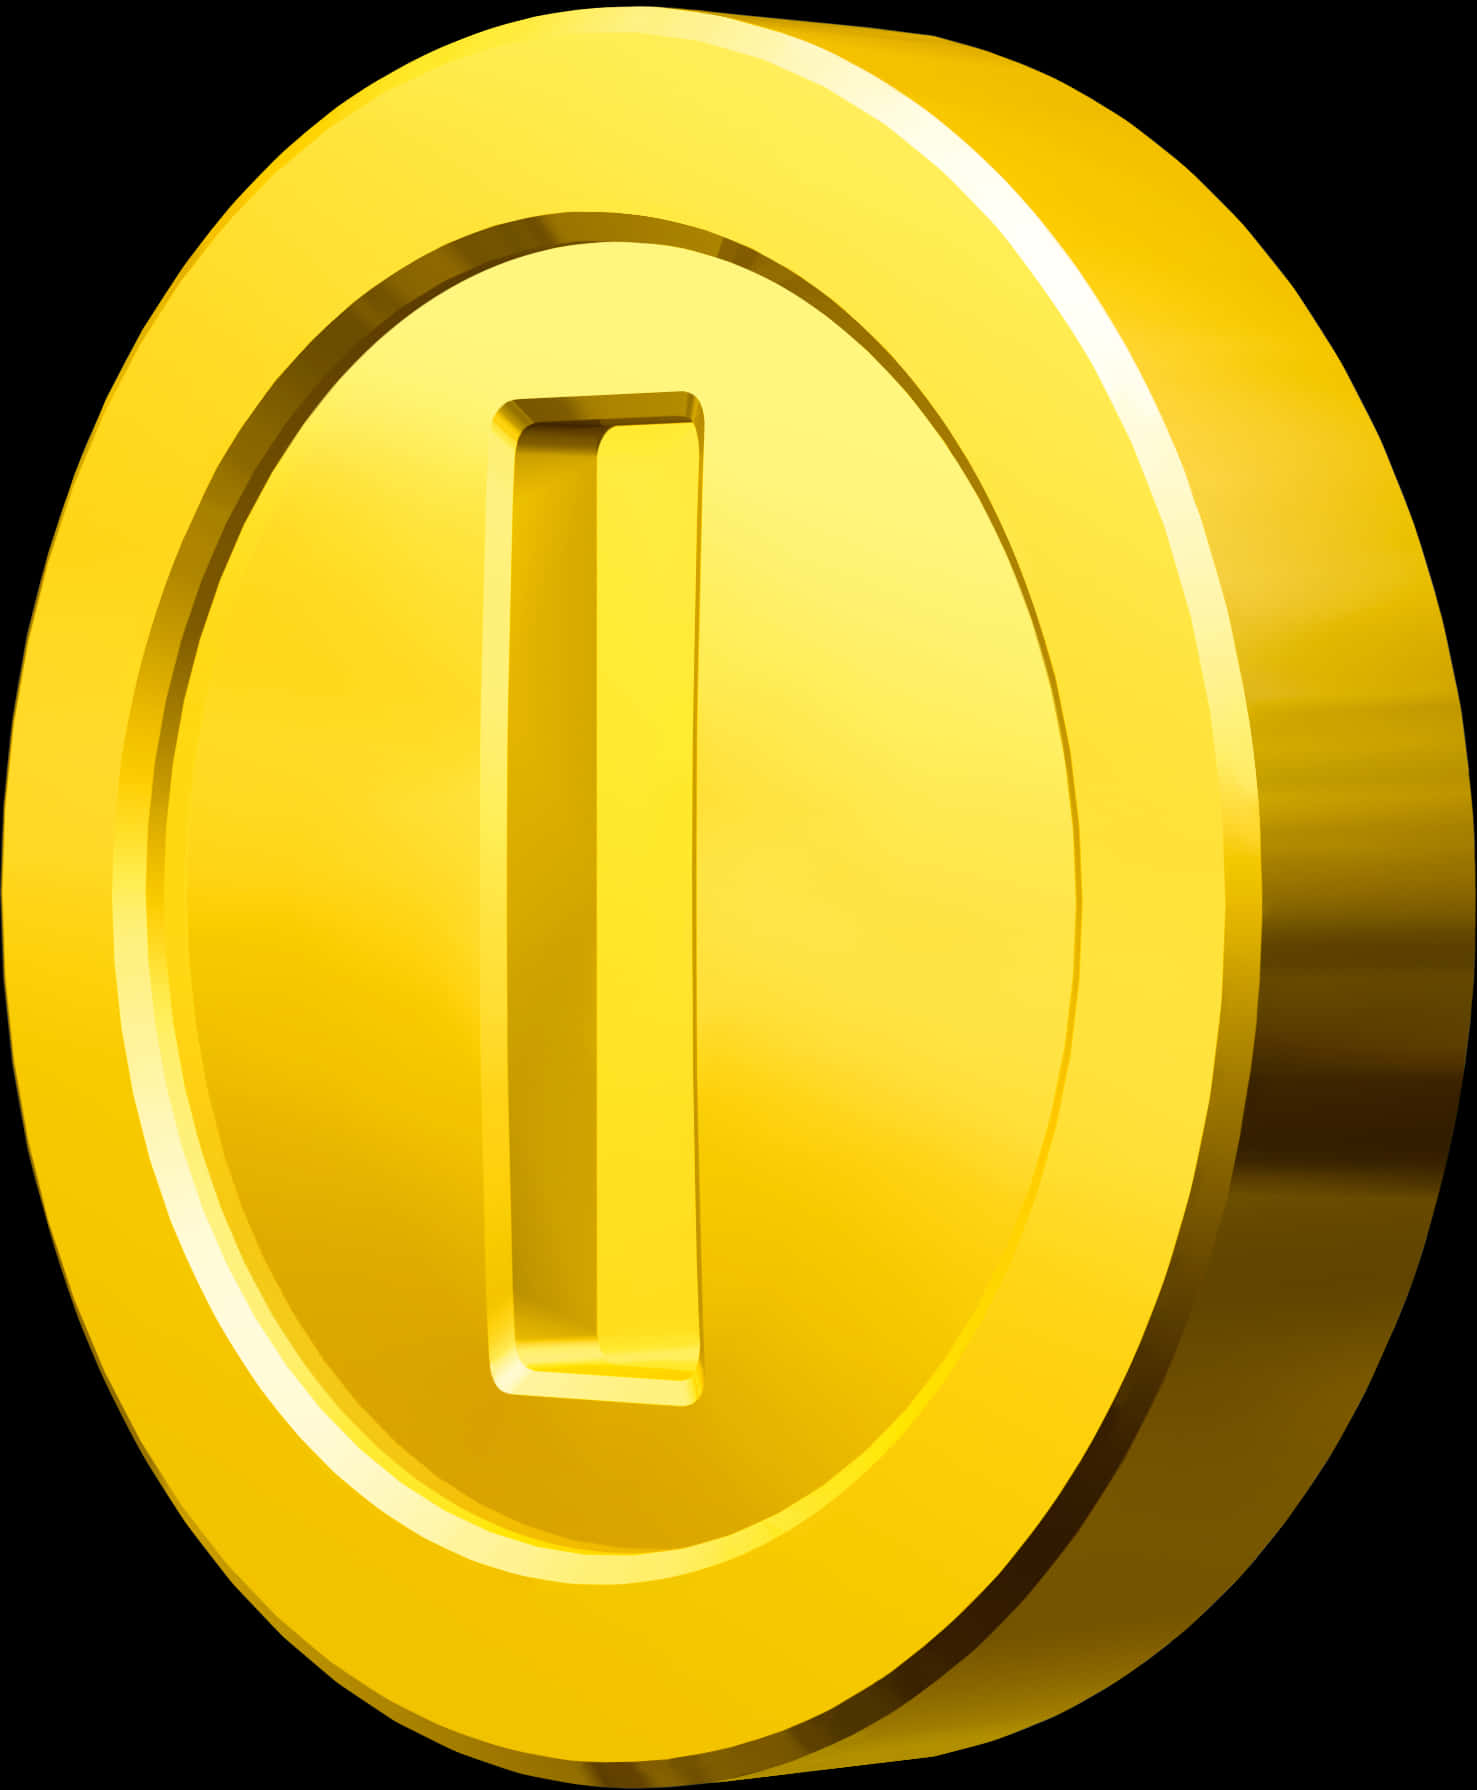 Download A Stack Of Gold Coins [100% Free] - FastPNG